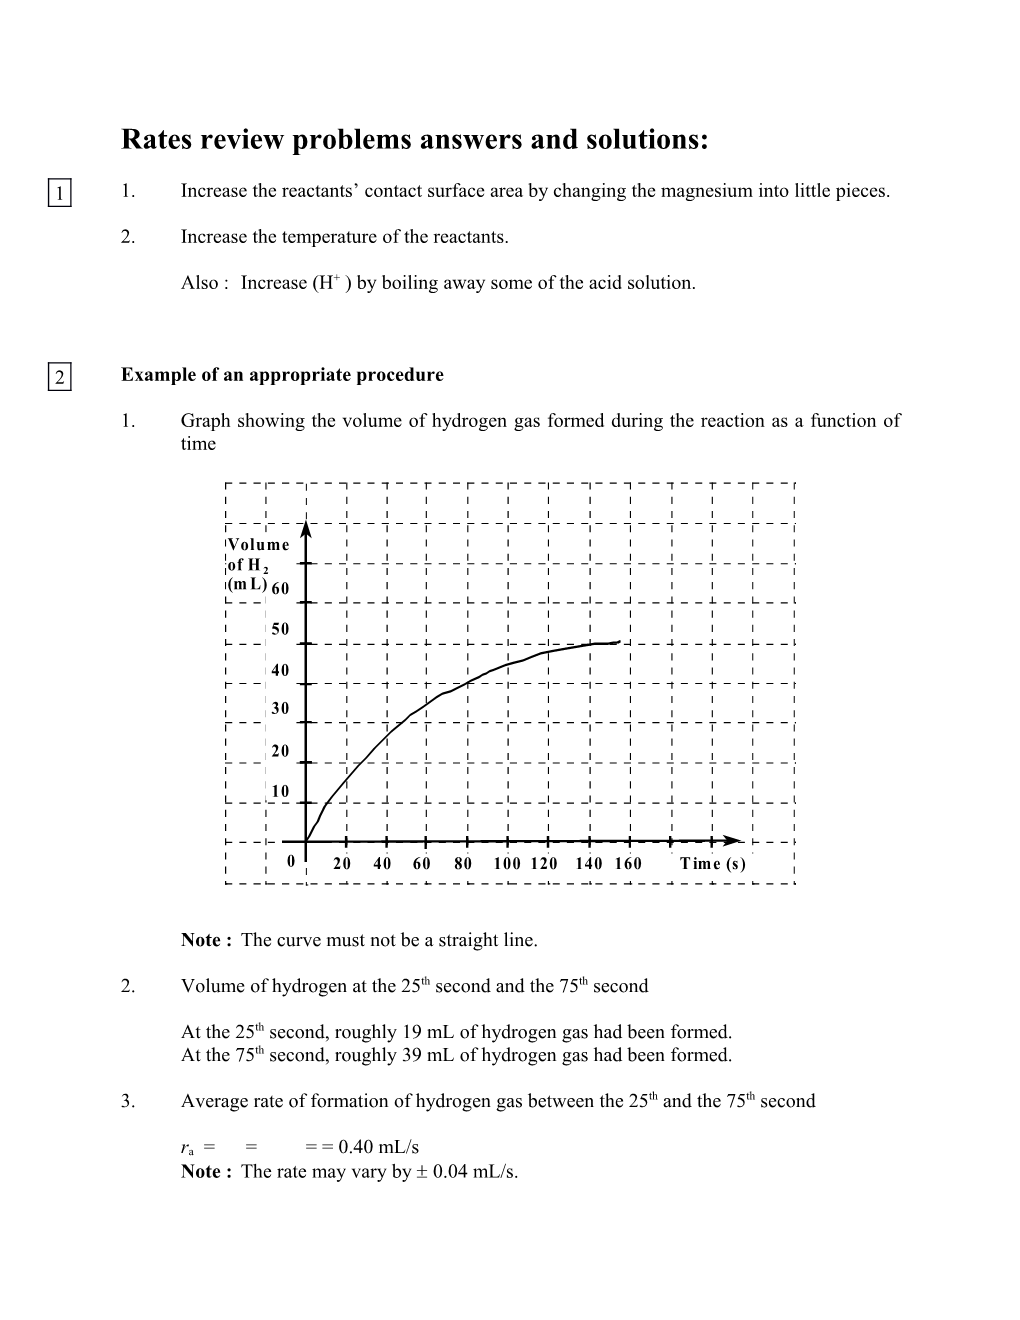 Rates Review Problems Answers and Solutions